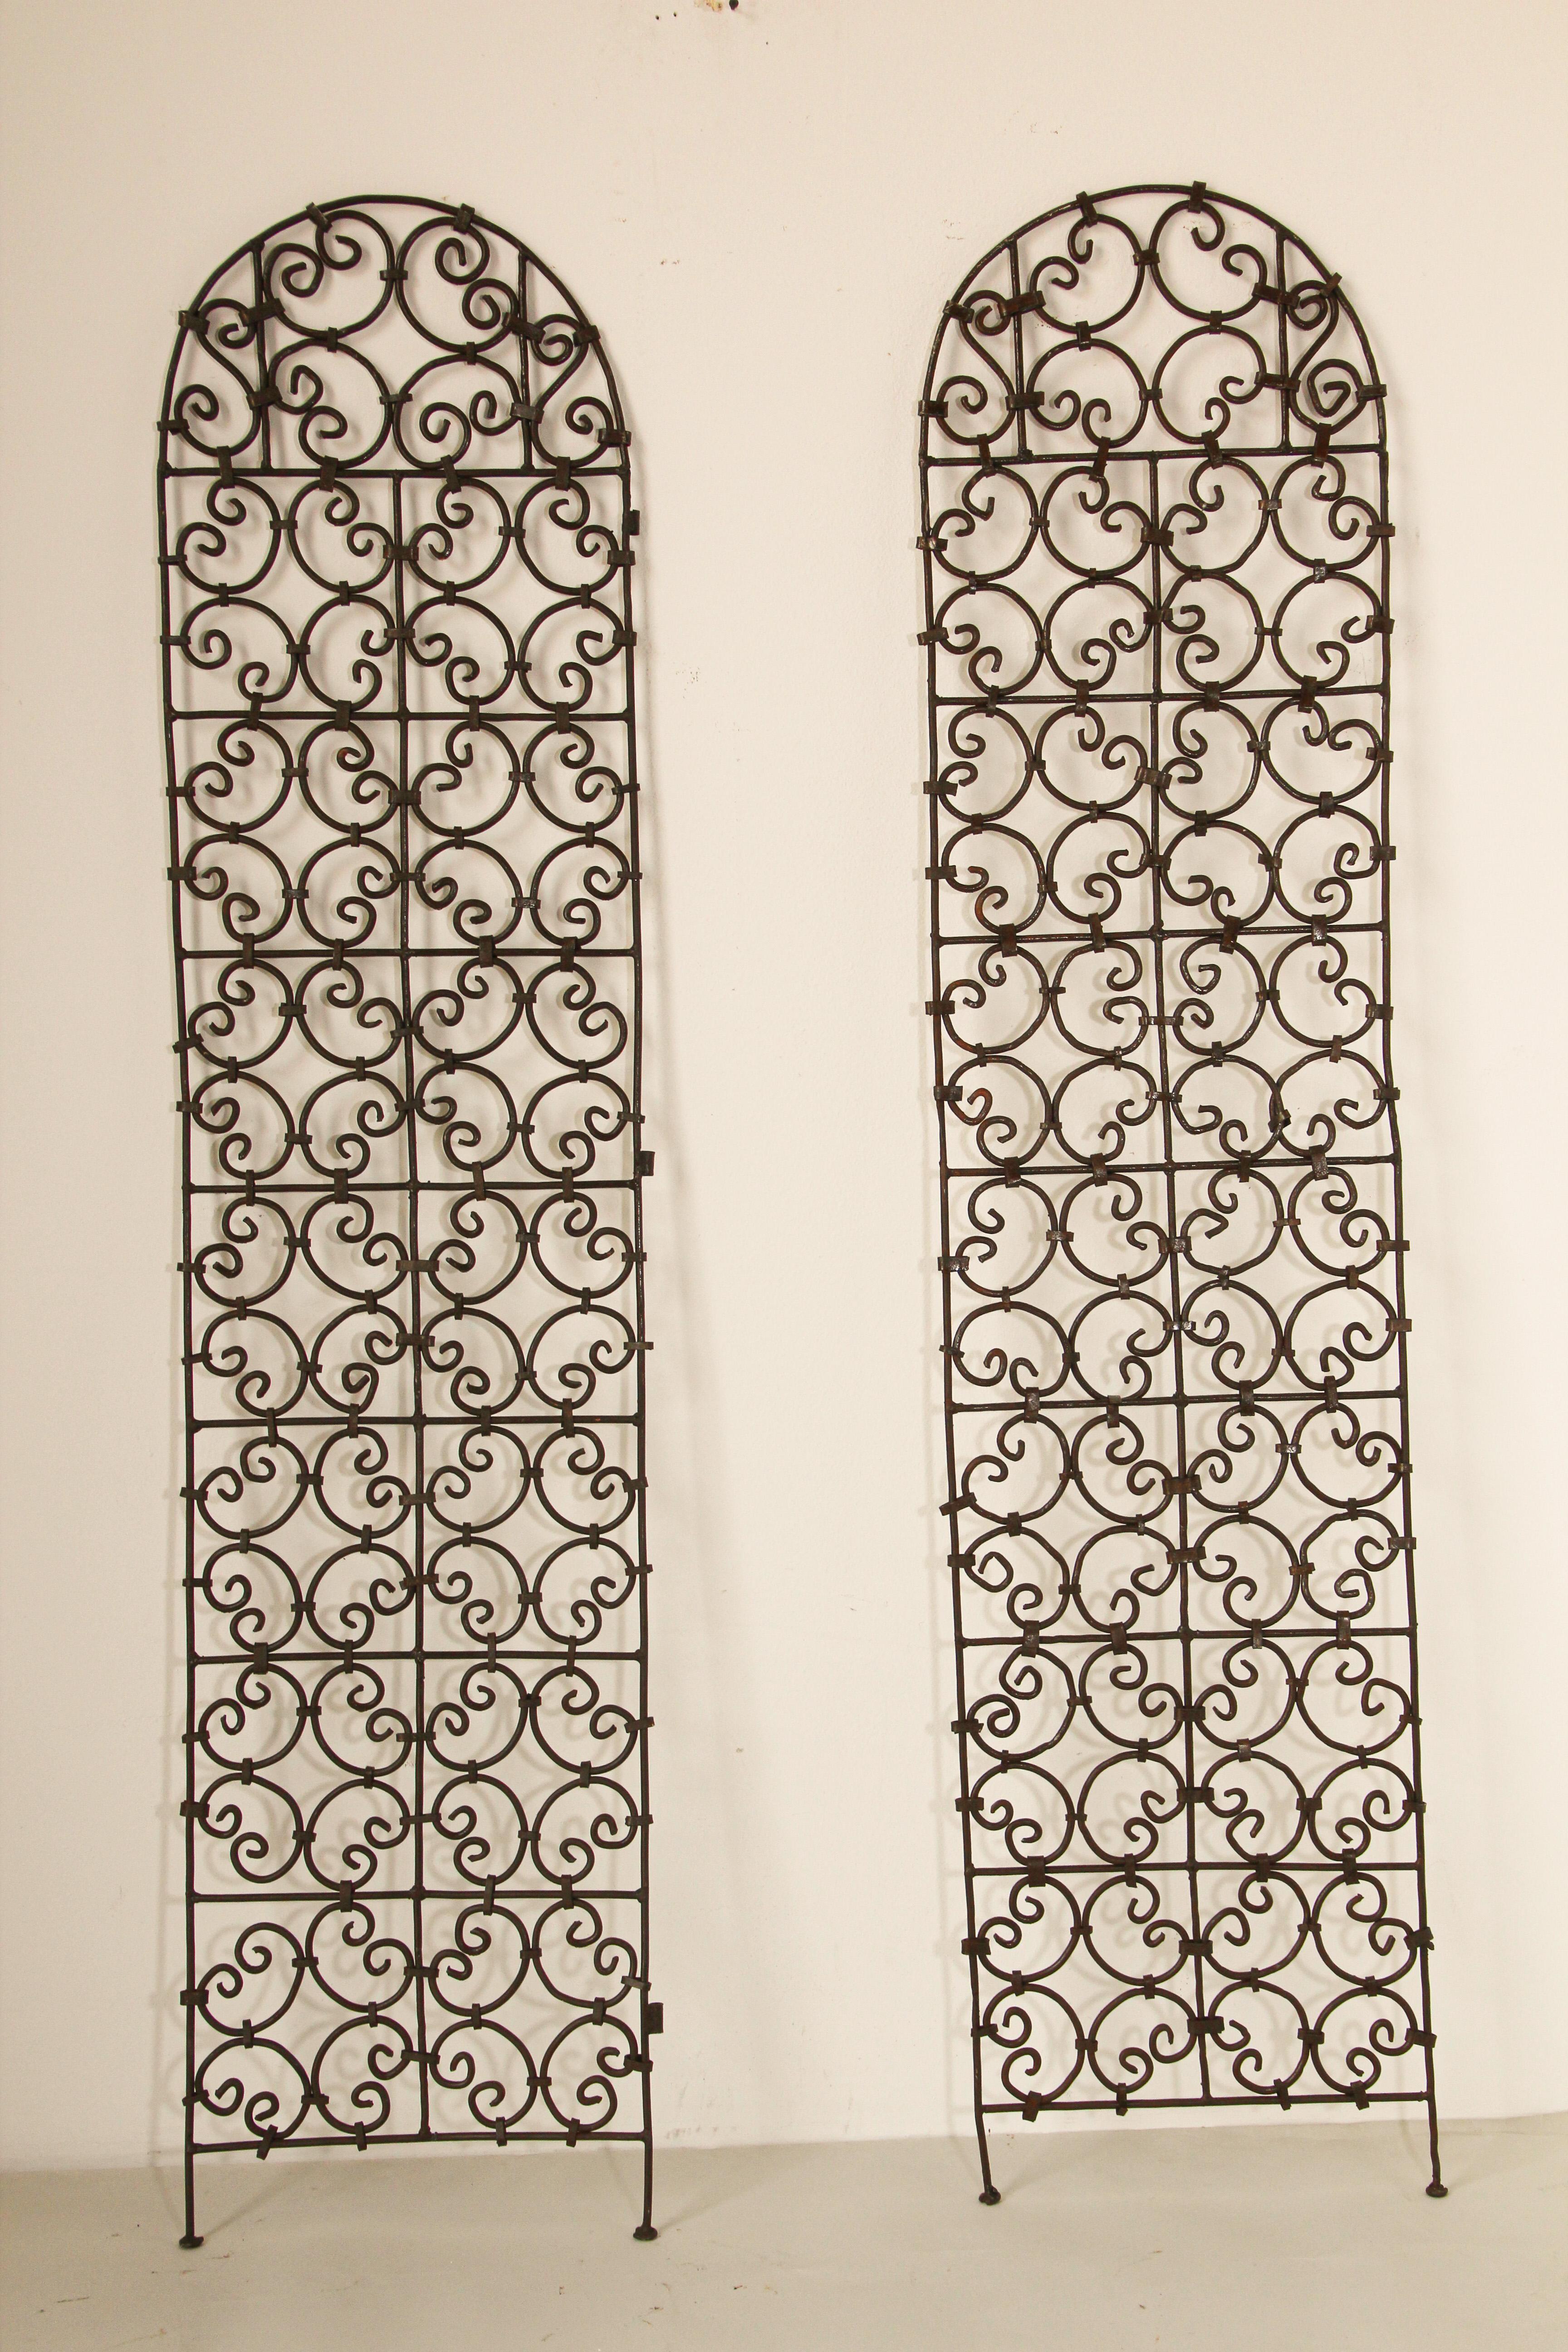 Set of two Moorish screen hand forged iron panels
Hand forged folding Moroccan screen panels decorated with Moorish designs.
Classic and elegant Art & Craft this highly embellished, detailed folding screen divider in the Mediterranean Spanish style